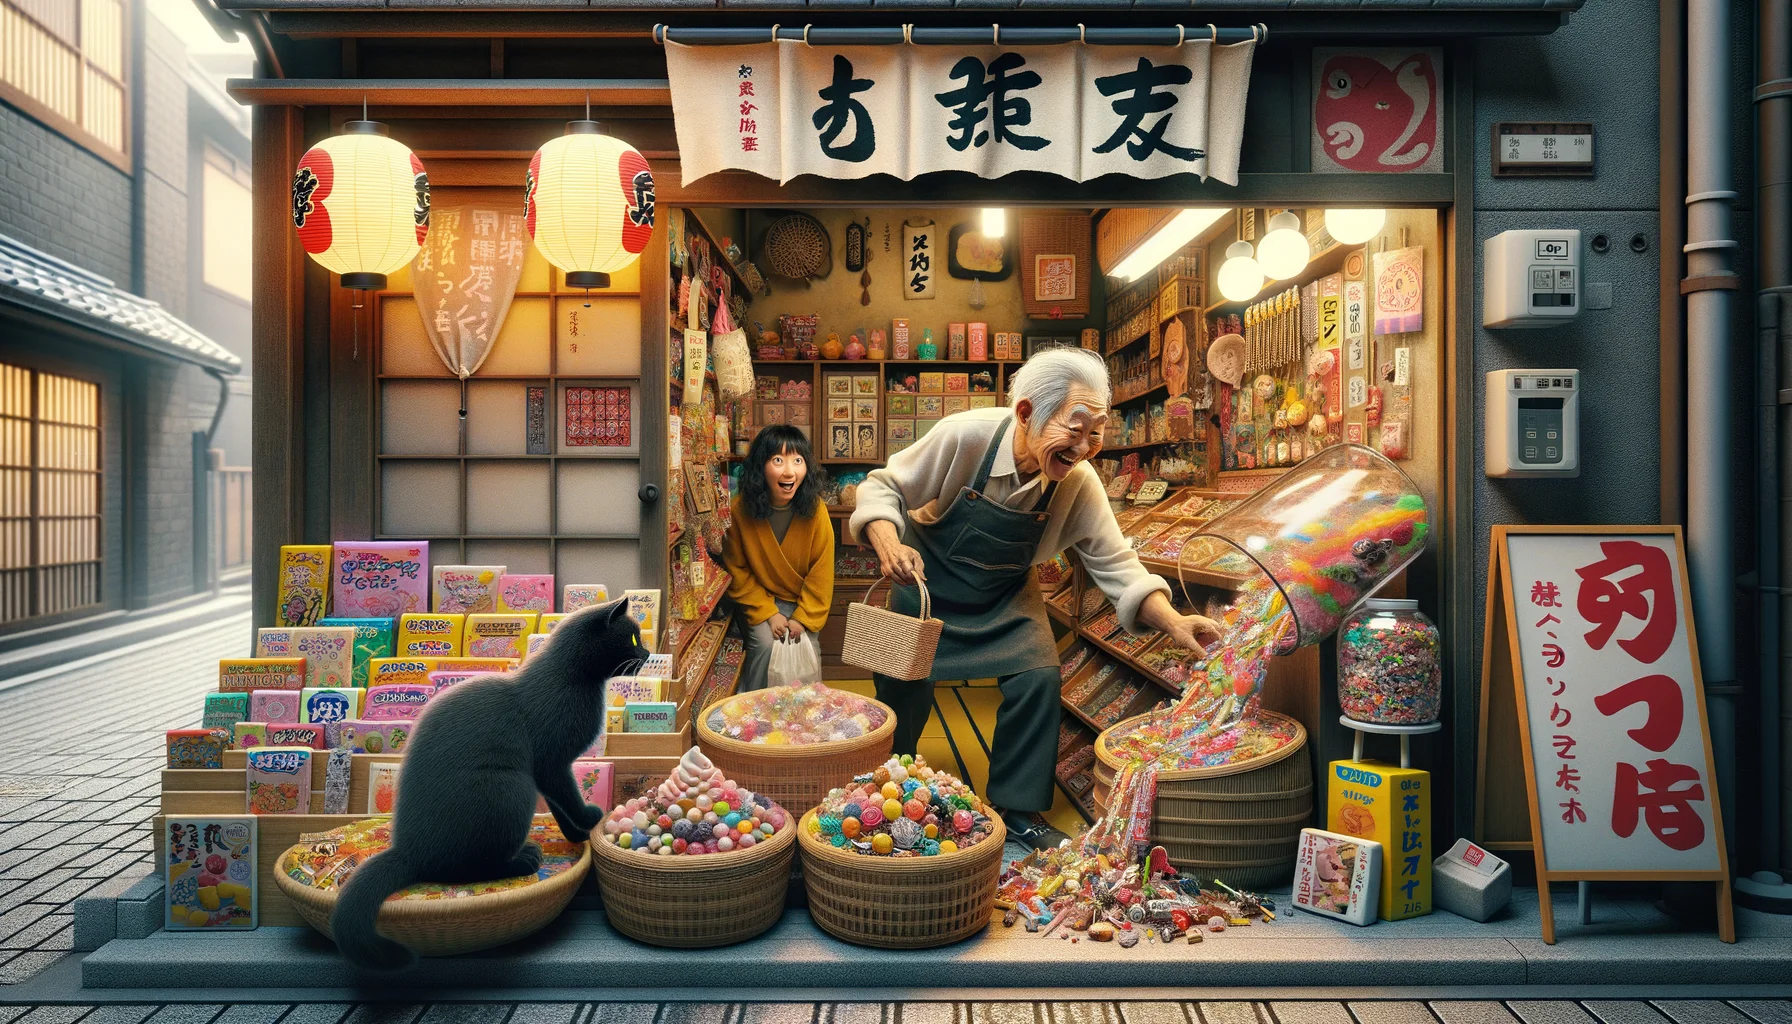 Imagine a comedic, realistic setting that perfectly showcases Japanese candy. A cluttered, yet cozy small candy shop nestled in a busy Tokyo alley. The shopkeeper, an elderly East Asian man with a jovial expression, is organizing colorful, unique sweets in various shapes and sizes. Picture an avalanche of candy tumbling from an overstuffed container, causing a black cat sitting on the counter to leap into the air in surprise. A young Caucasian girl peering in through the shop window stares in wide-eyed astonishment. Incorporate elements of Japanese culture in the design like traditional lanterns and signage.